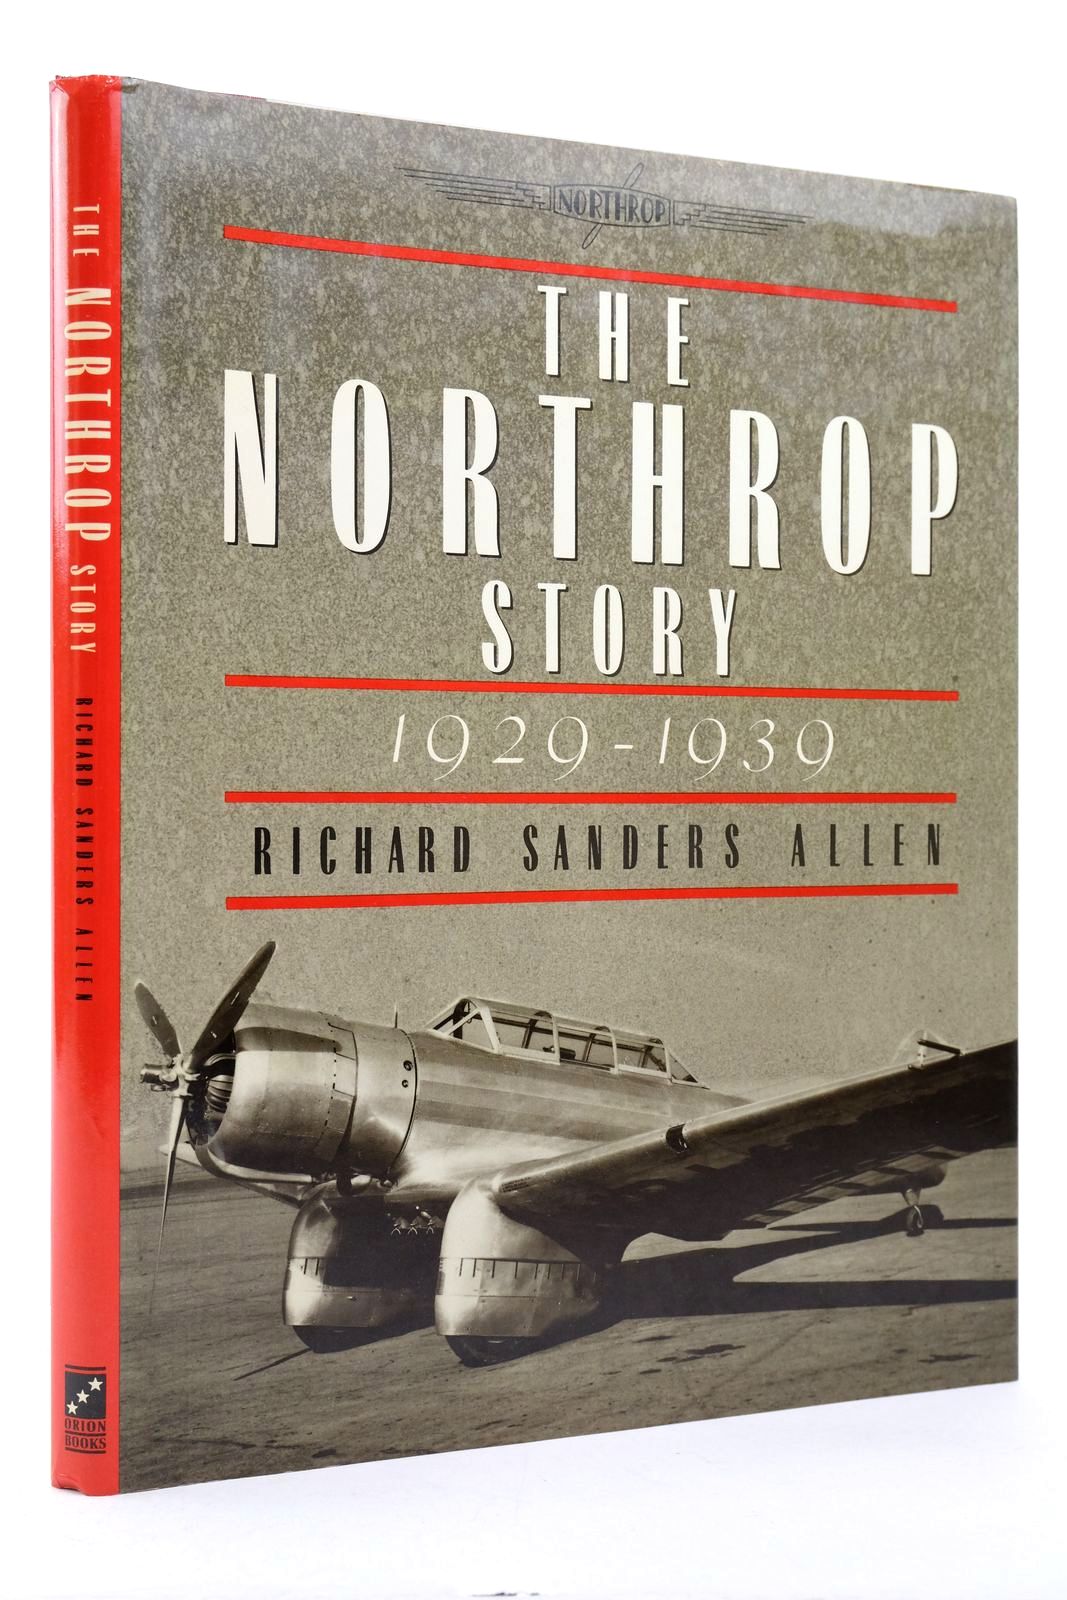 Photo of THE NORTHROP STORY 1929-1939 written by Allen, Richard Sanders published by Orion Books (STOCK CODE: 2139627)  for sale by Stella & Rose's Books